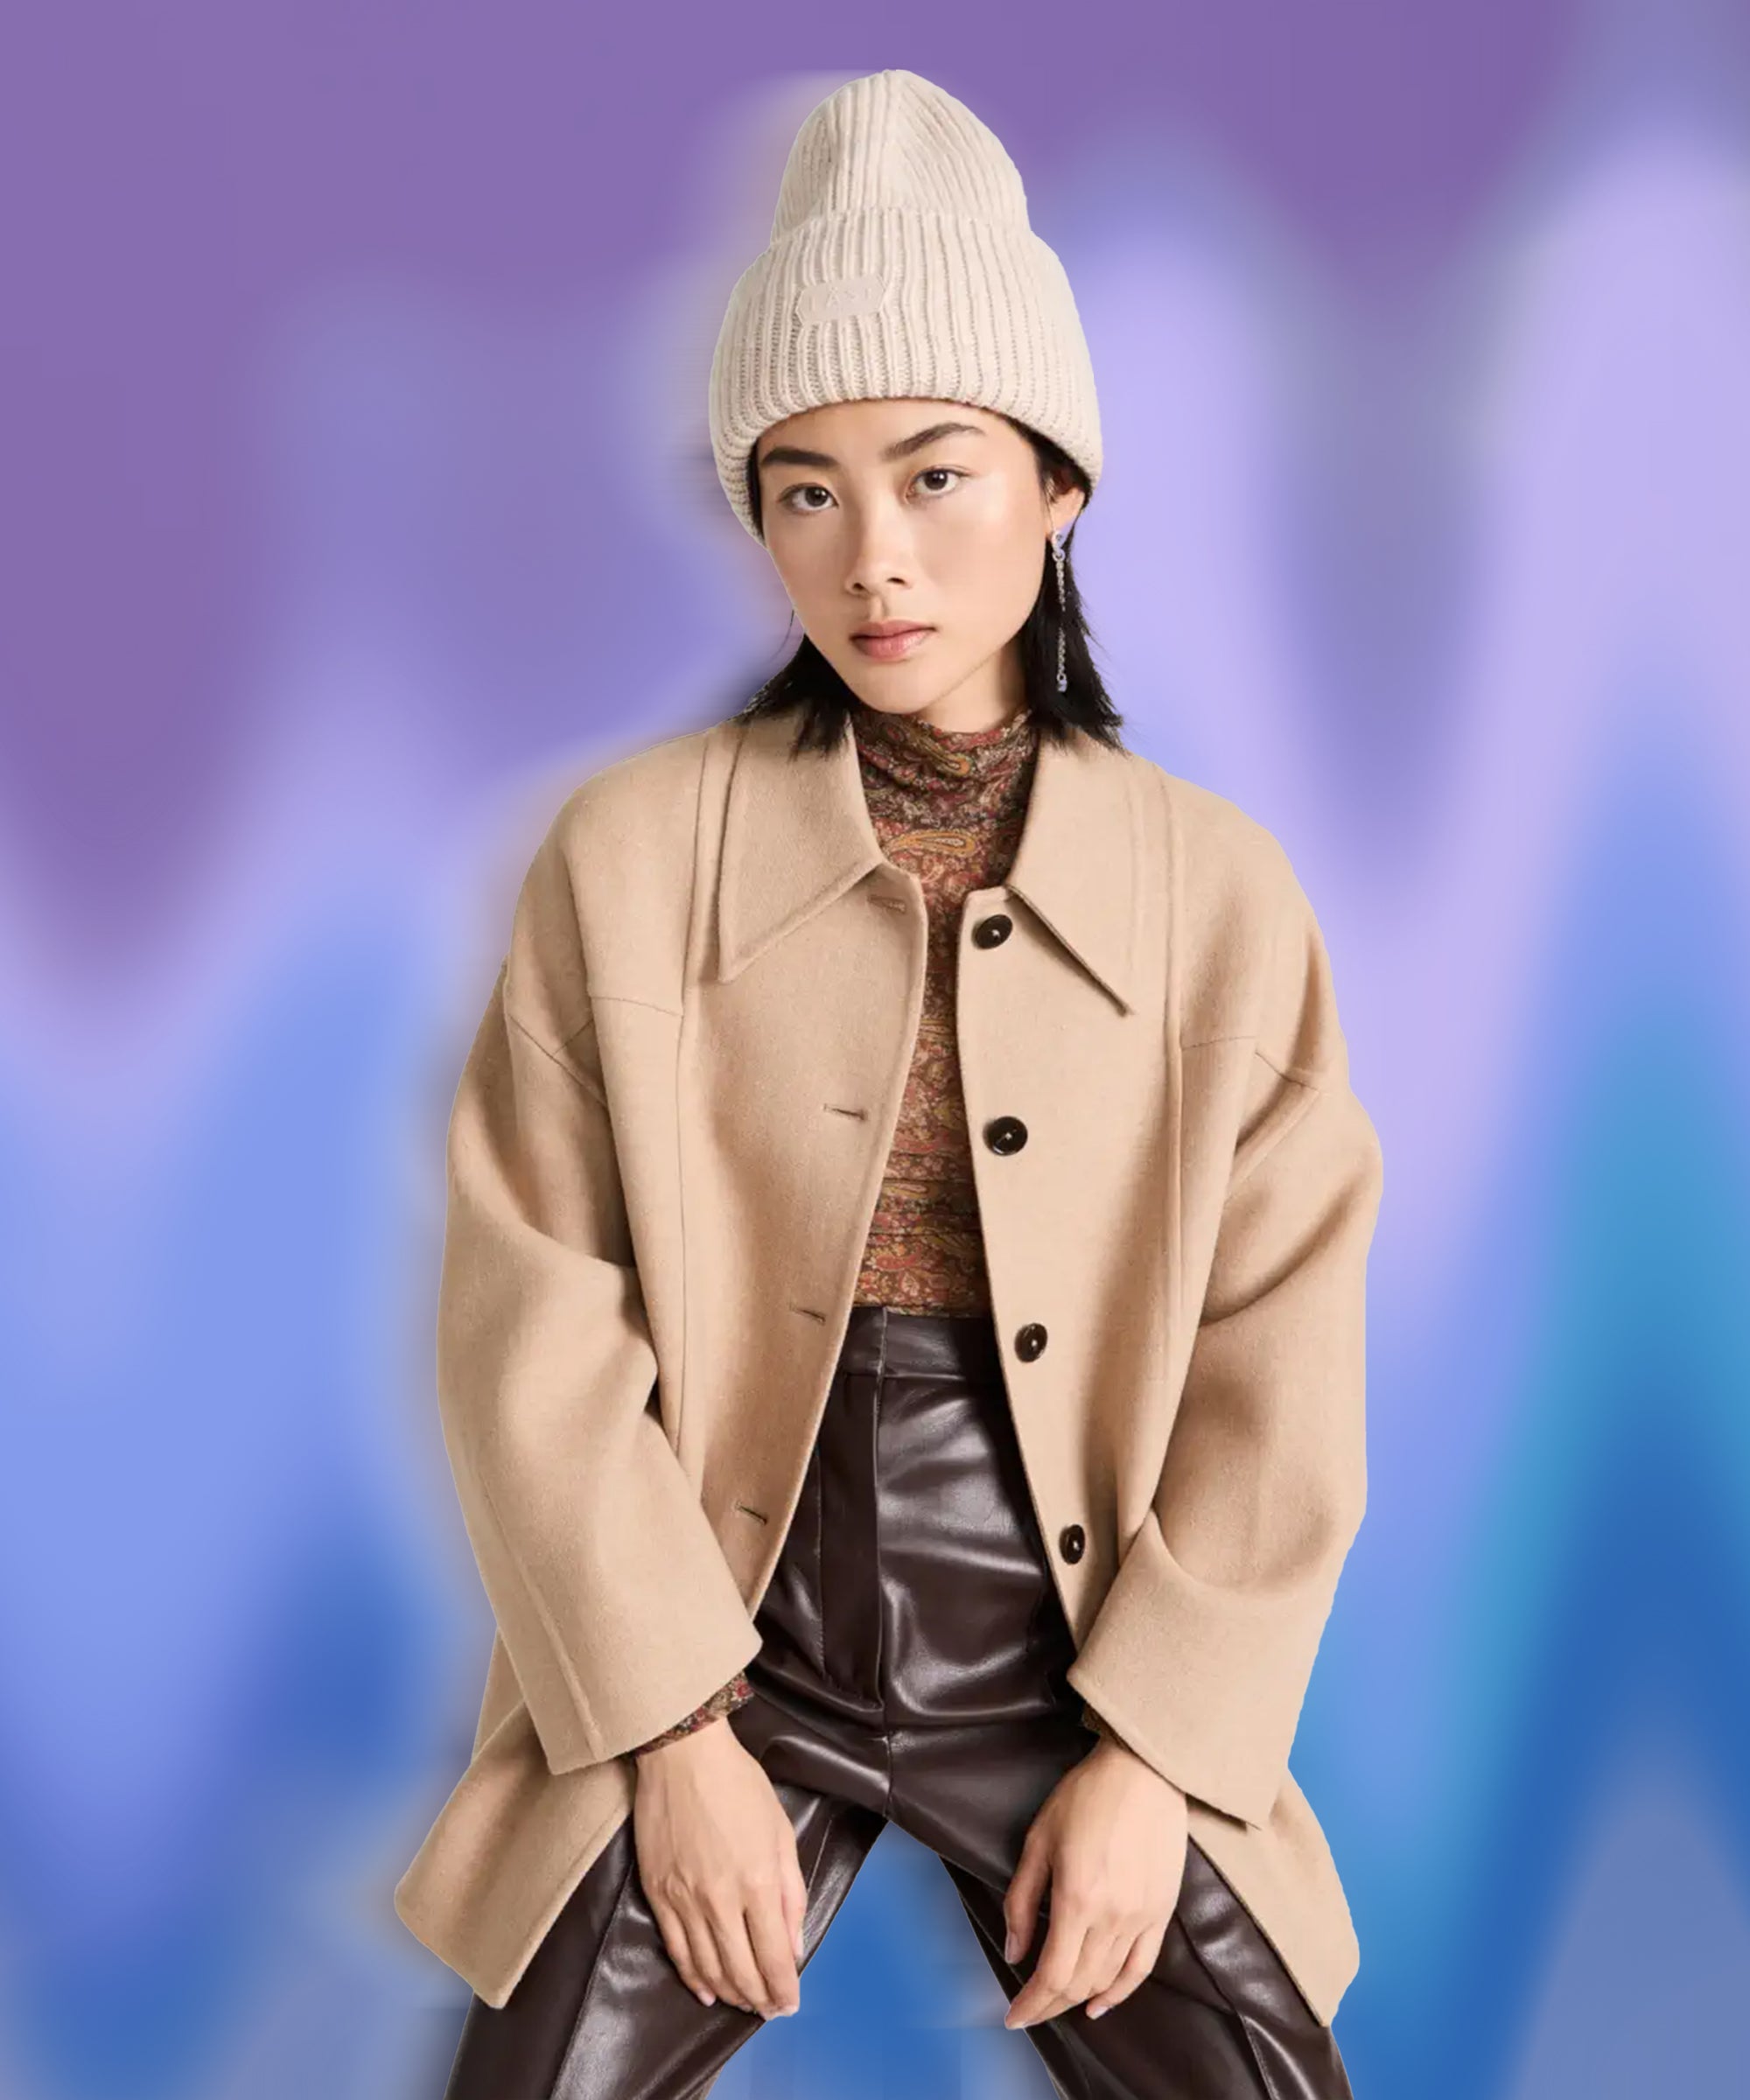 Style Essentials] Classic Fall Must-Haves: A Camel Coat & Sneakers